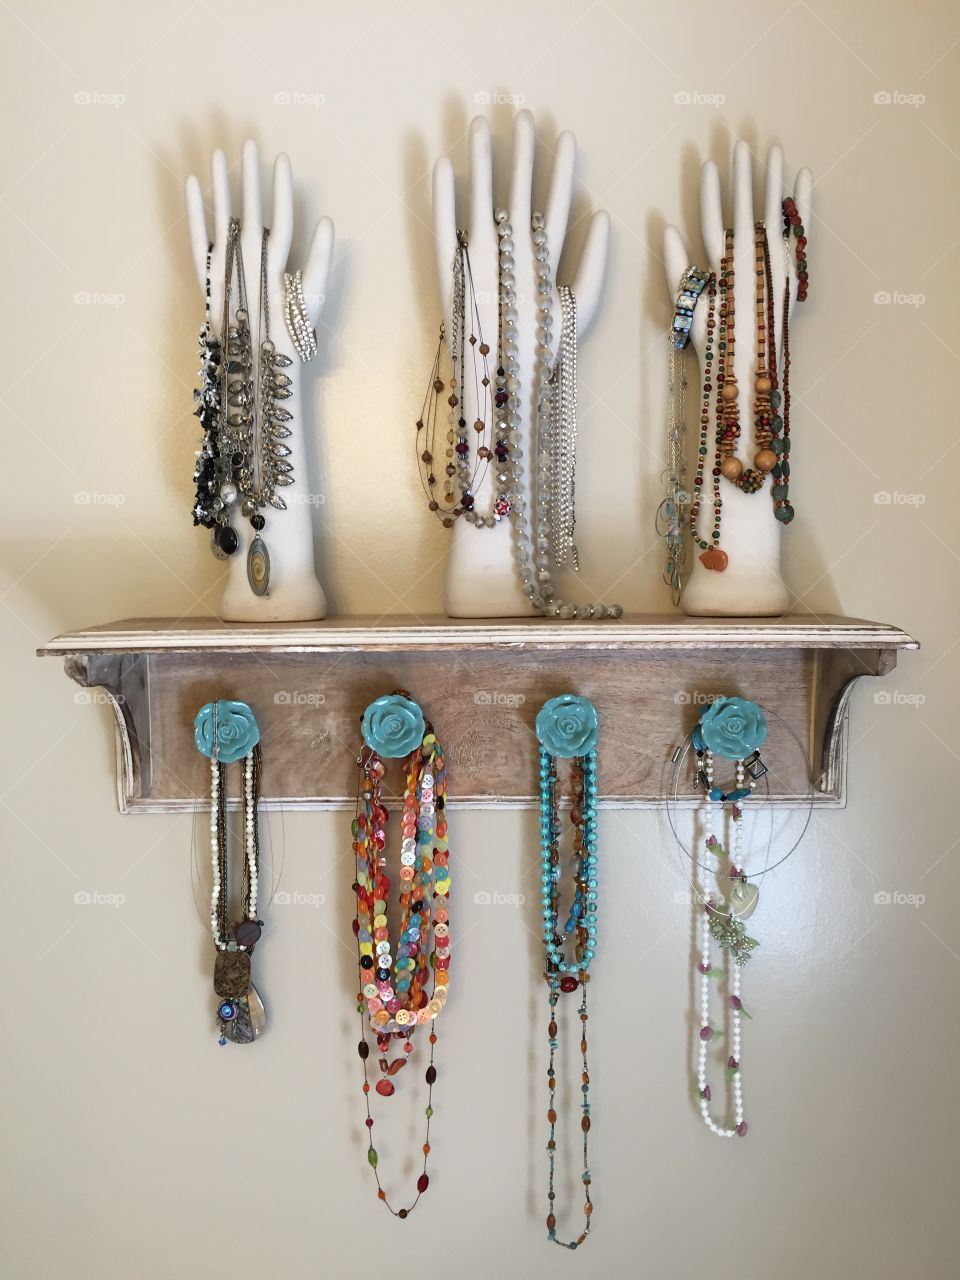 Women's jewelry. Women's jewelry hanging on a shelf and ceramic hands from the balsams grand resort hotel
